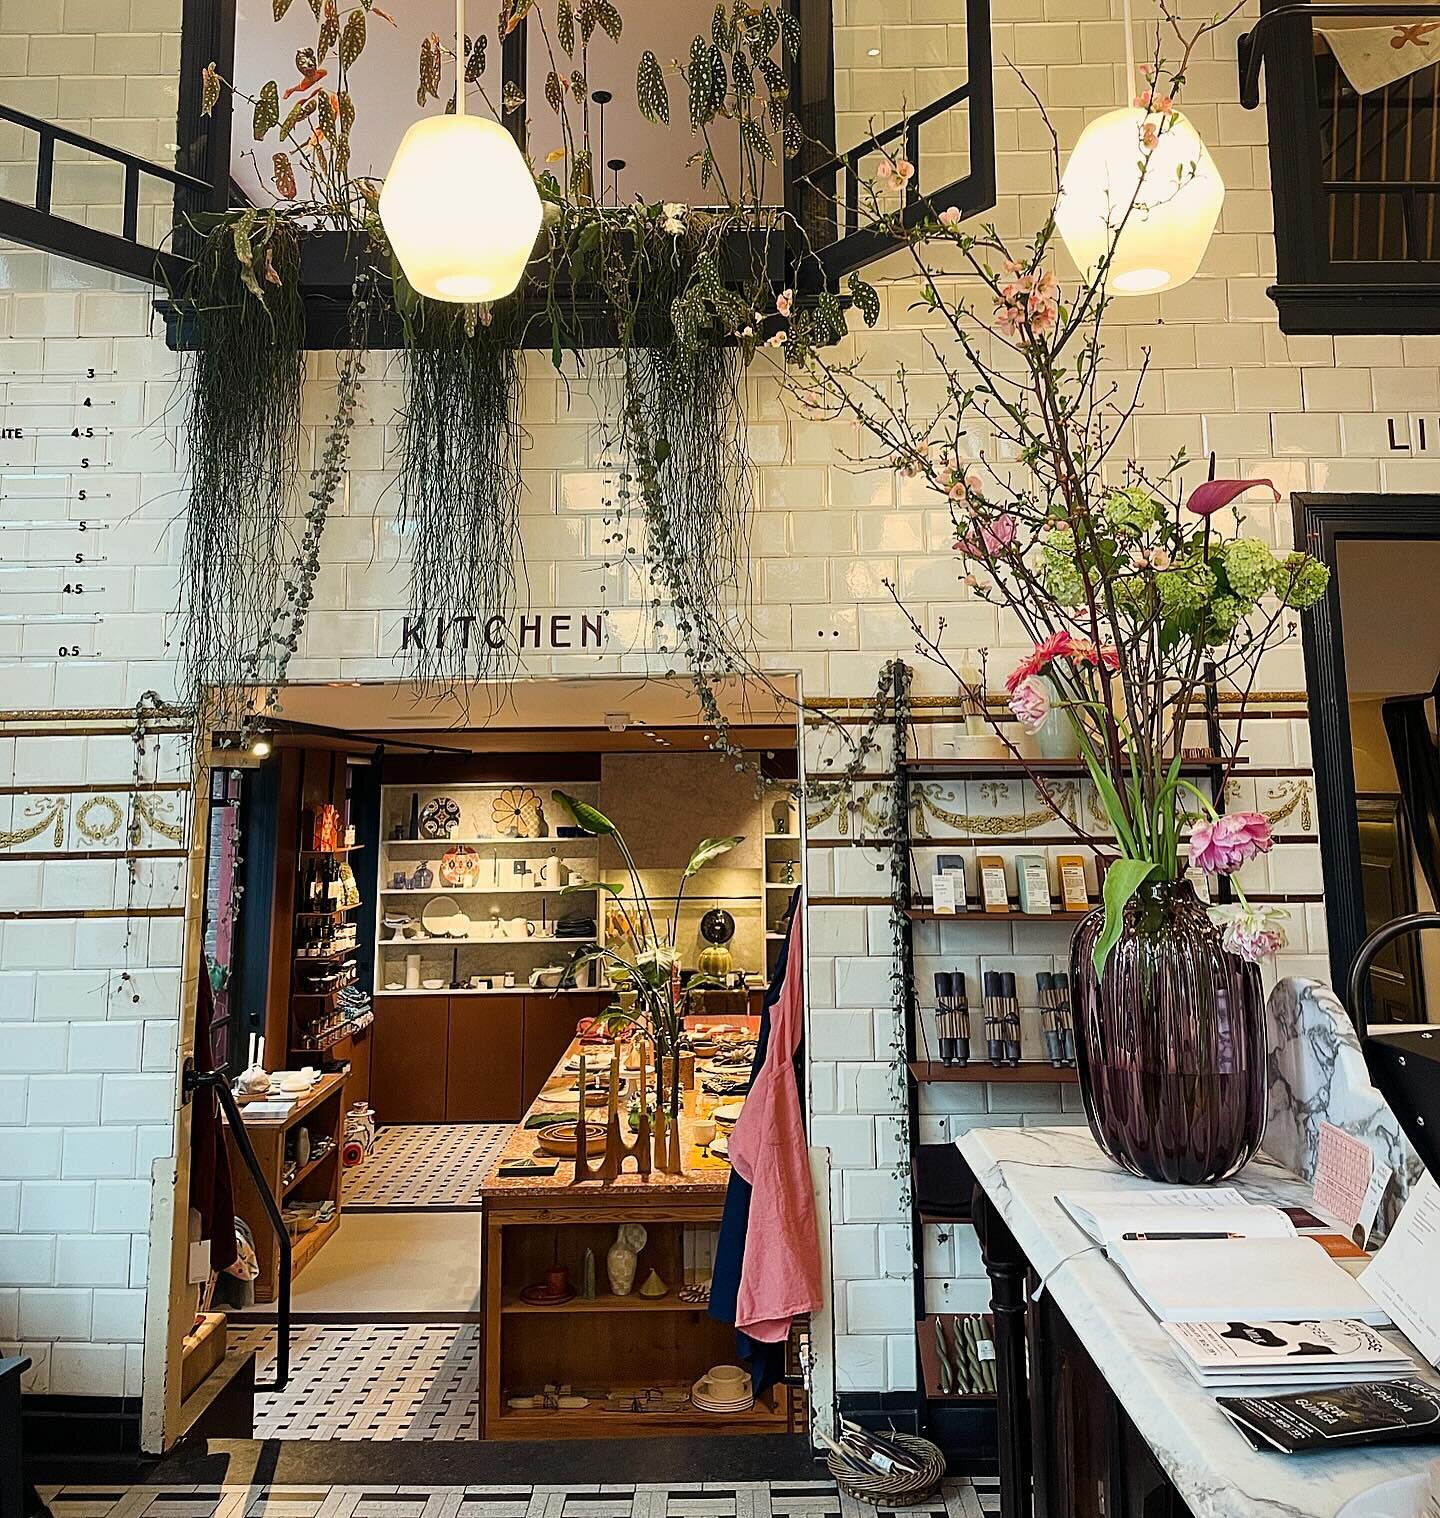 #tbt to #amsterdam @edibletreasuresshop a place we fell in love with, mix of a coffee shop, kitchenware, lifestyle books, colorful linen and tableware, all sourced in a durable way. A true #multidestination retail space that strengthens our matching 